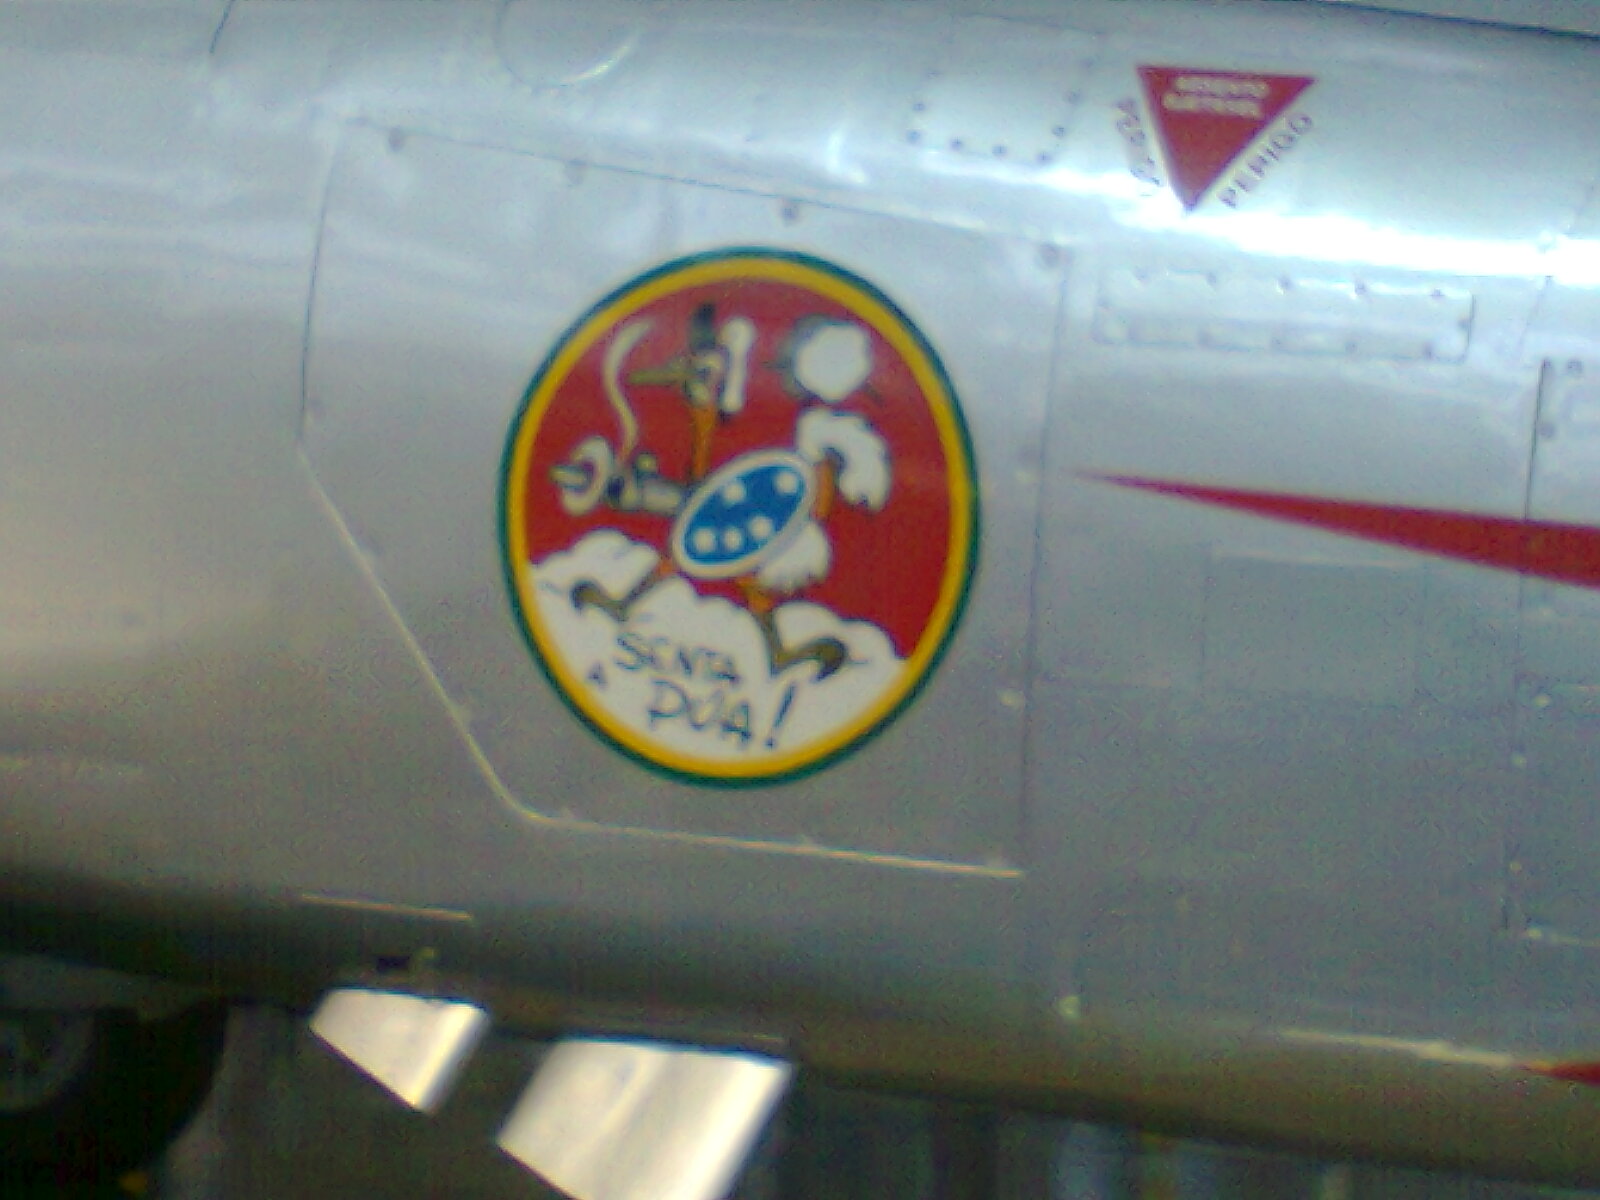 Brazillian Expeditionary Air Force symbol - "Senta a Pua".  (I have no idea on how to translate that in English...)